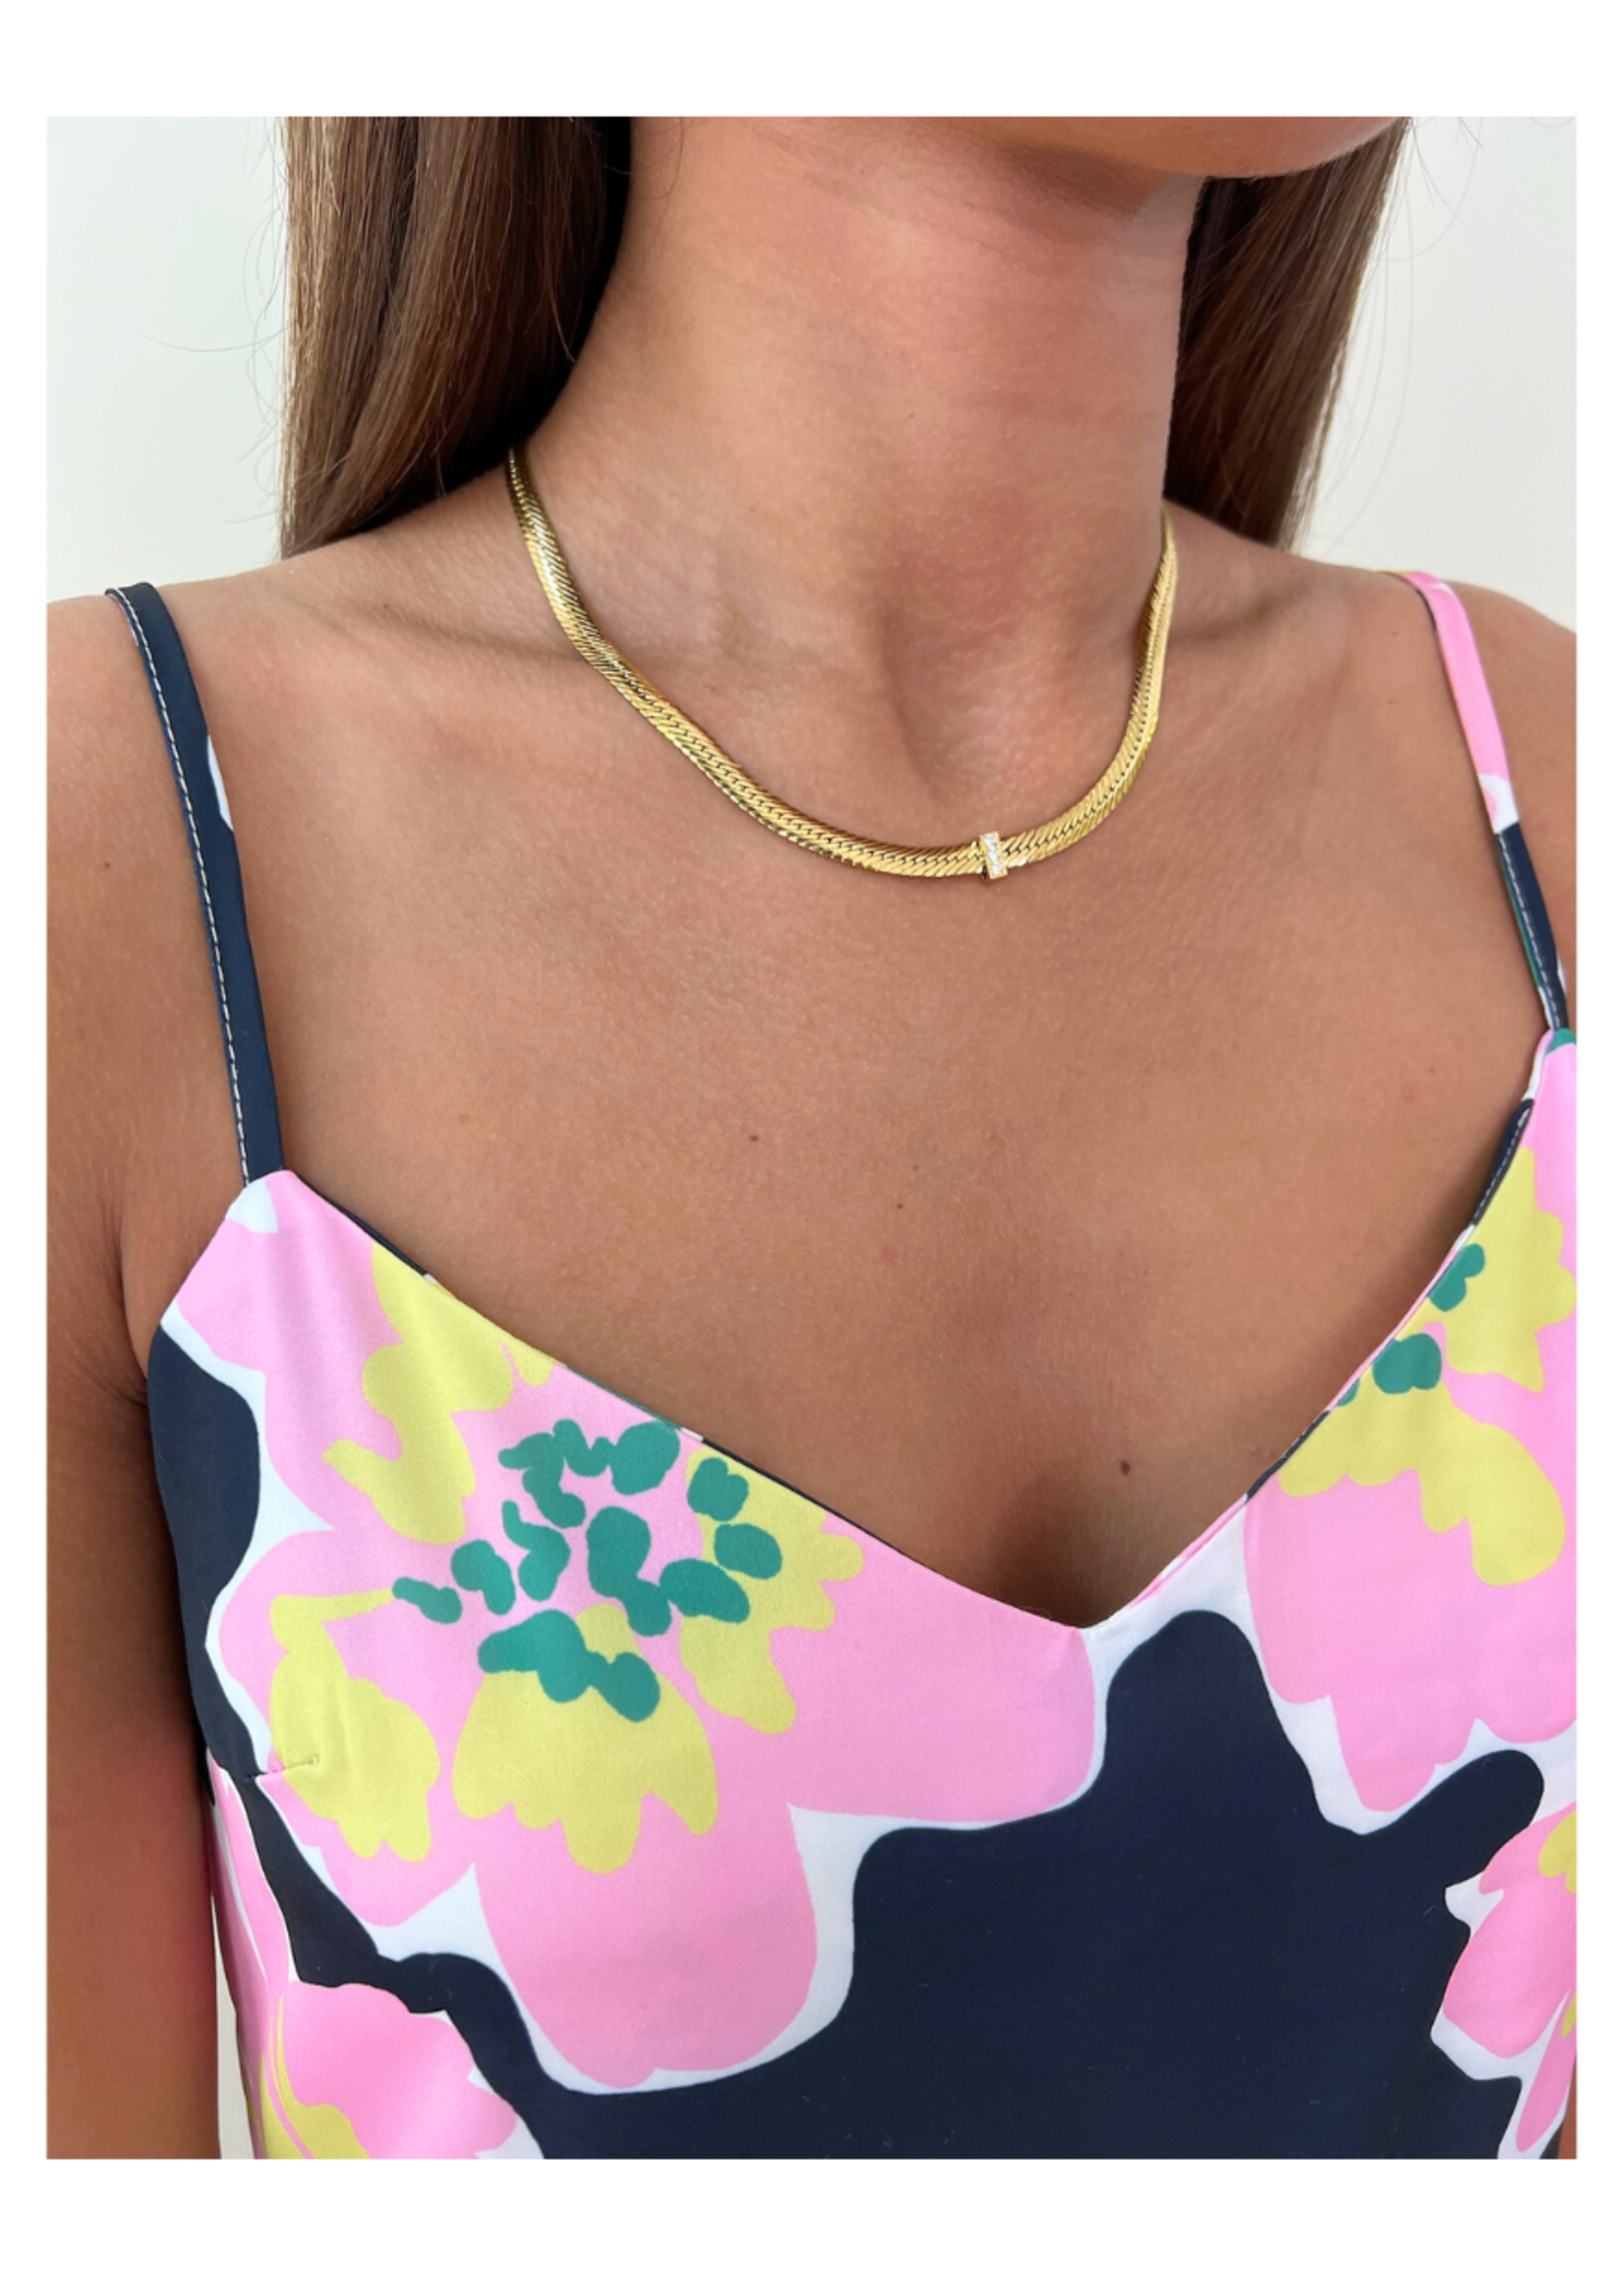 kiss me kate Gold Snake Chain with Cubic Zirconia